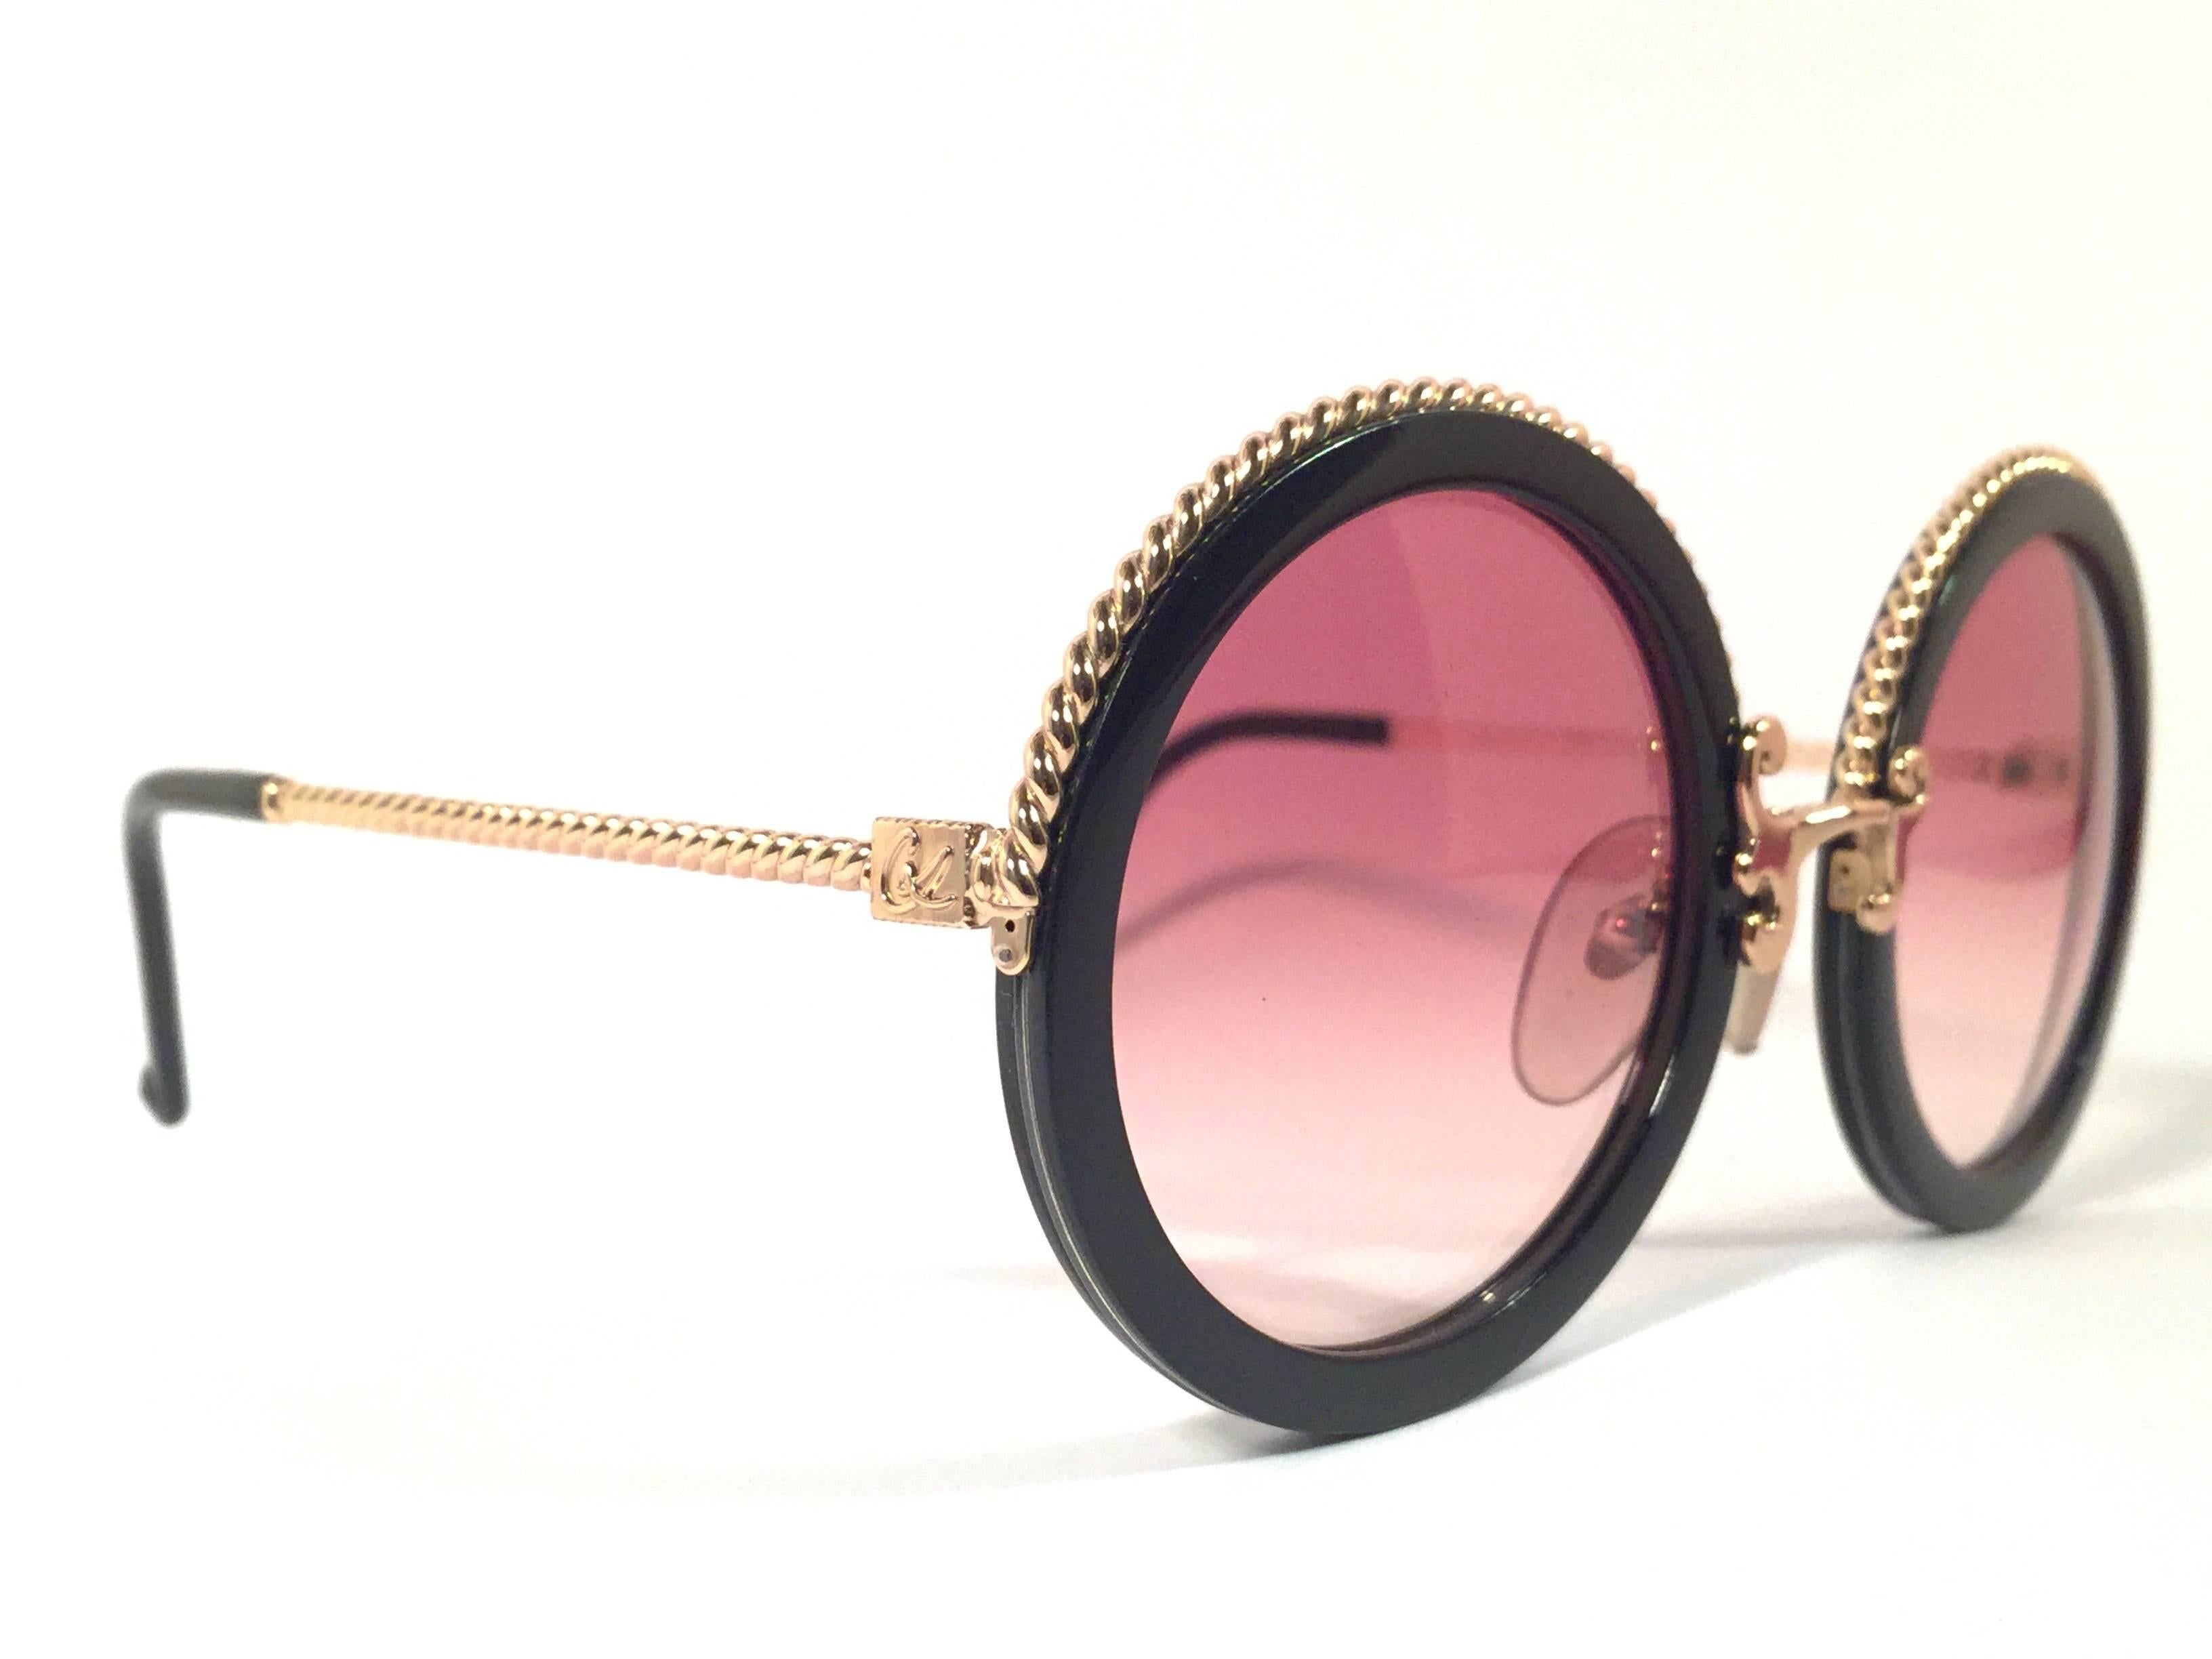 Superb & rare pair of New vintage Christian Lacroix sunglasses.   

Black with delicate gold accents frame holding a pair of spotless amber lenses.  

New, never worn or displayed. Made in France.